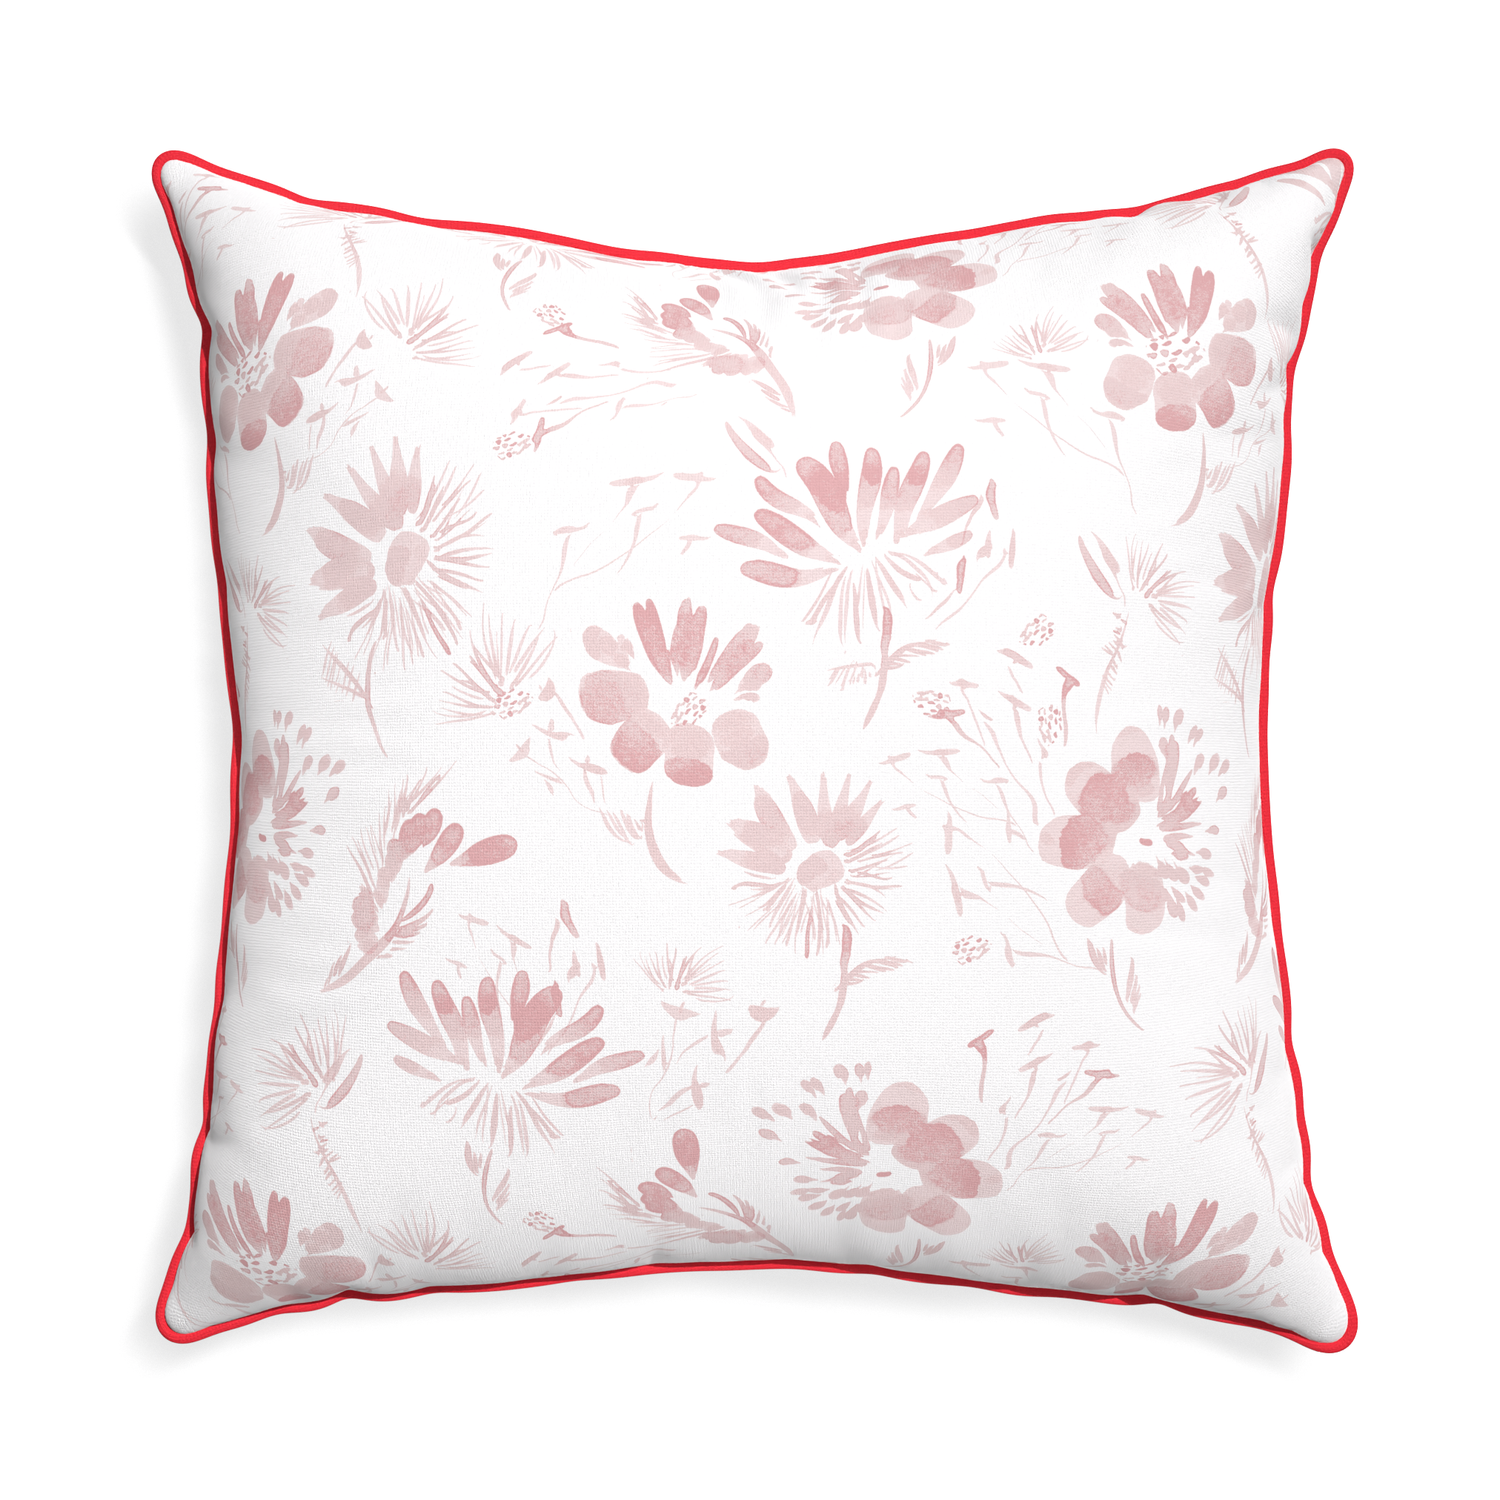 Euro-sham blake custom pink floralpillow with cherry piping on white background